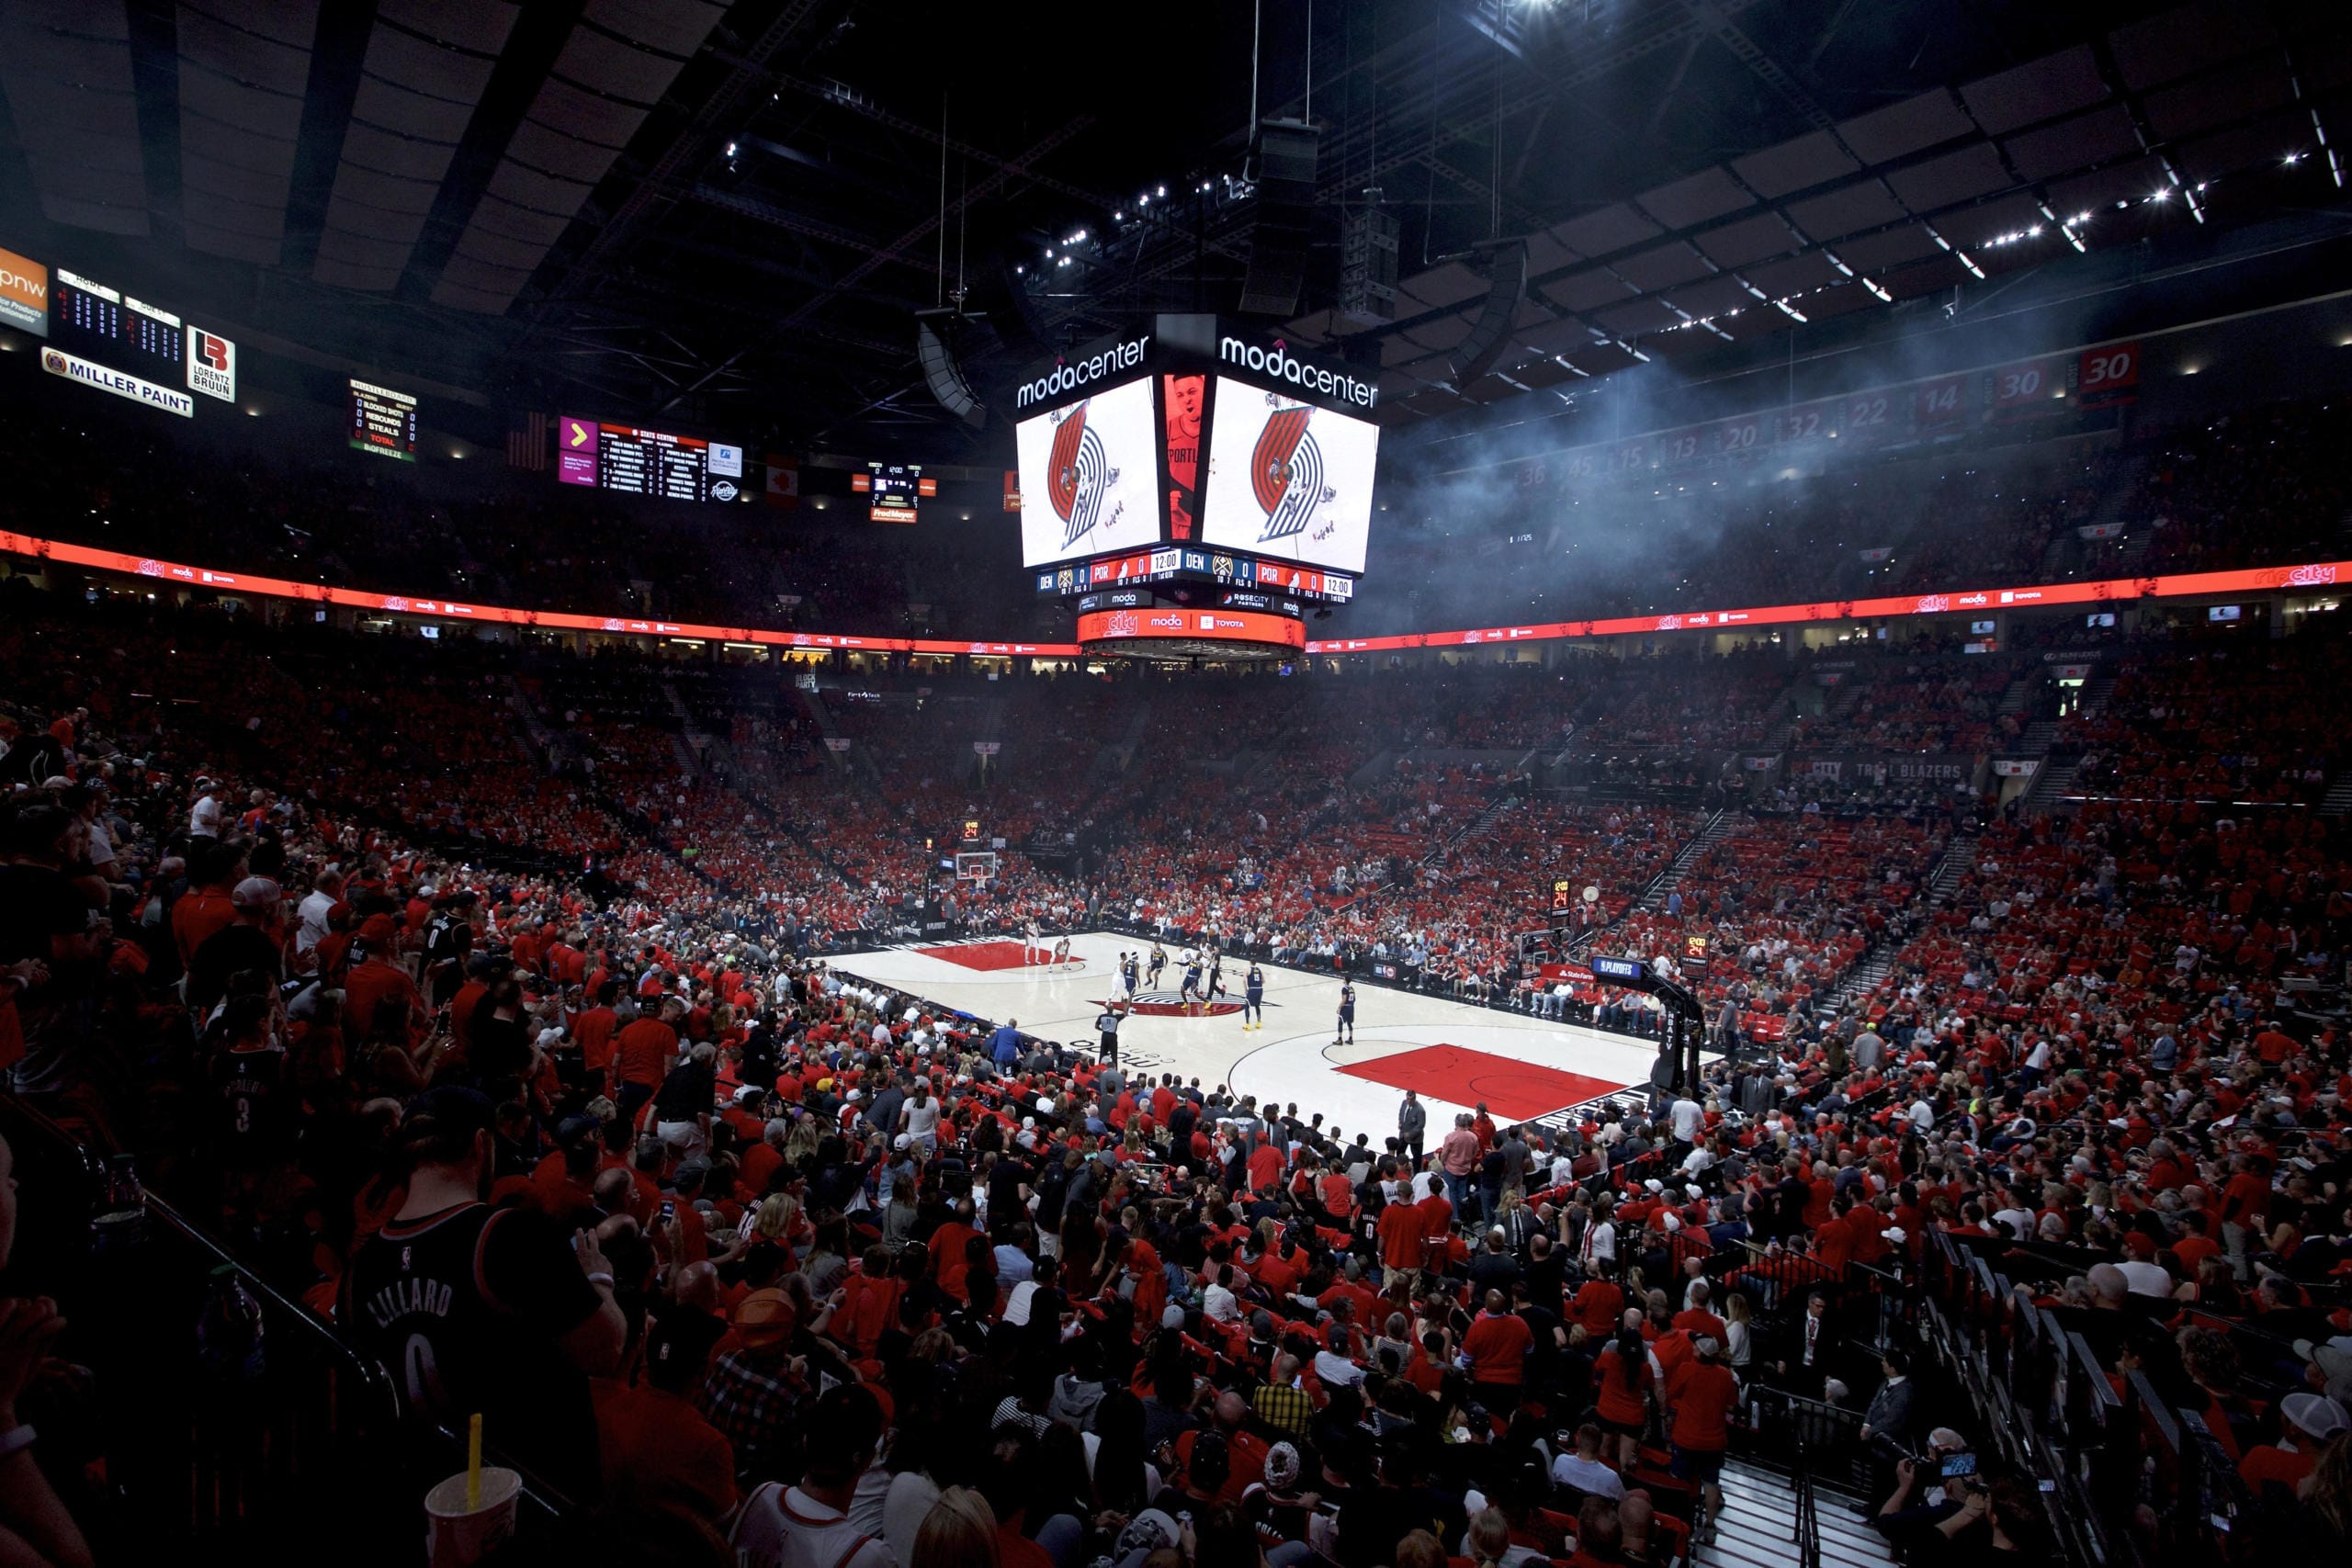 The Portland Trail Blazers will open the 2020-21 season on Dec. 23 against the Utah Jazz at the Moda Center in Portland. However, the arena will be empty as fans won’t be allowed to enter due to COVID-19 concerns.